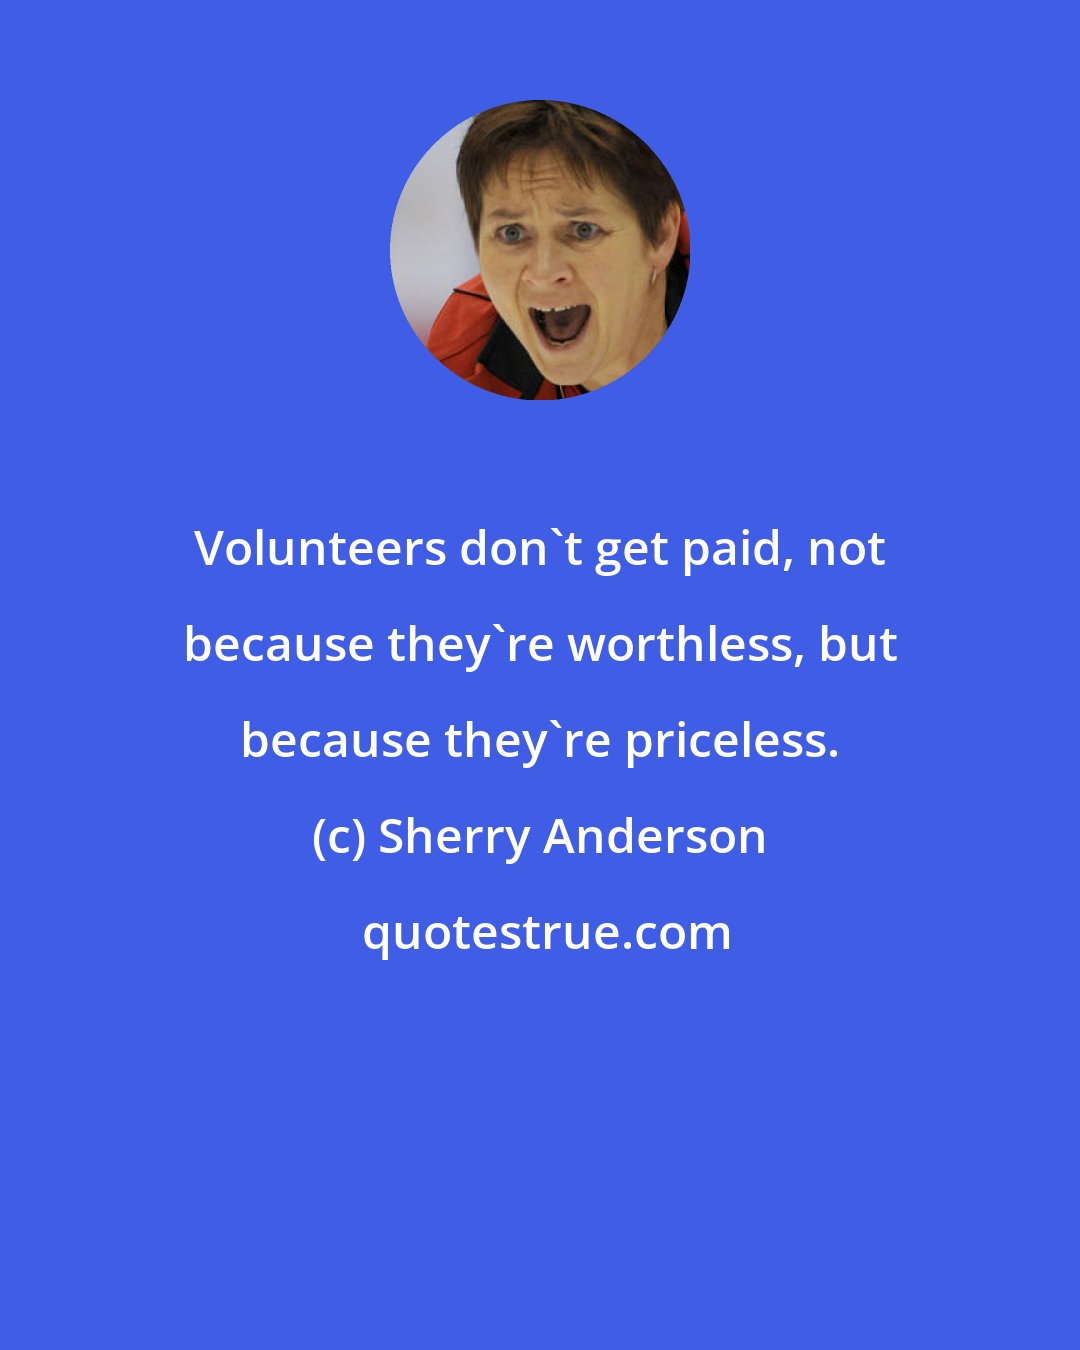 Sherry Anderson: Volunteers don't get paid, not because they're worthless, but because they're priceless.